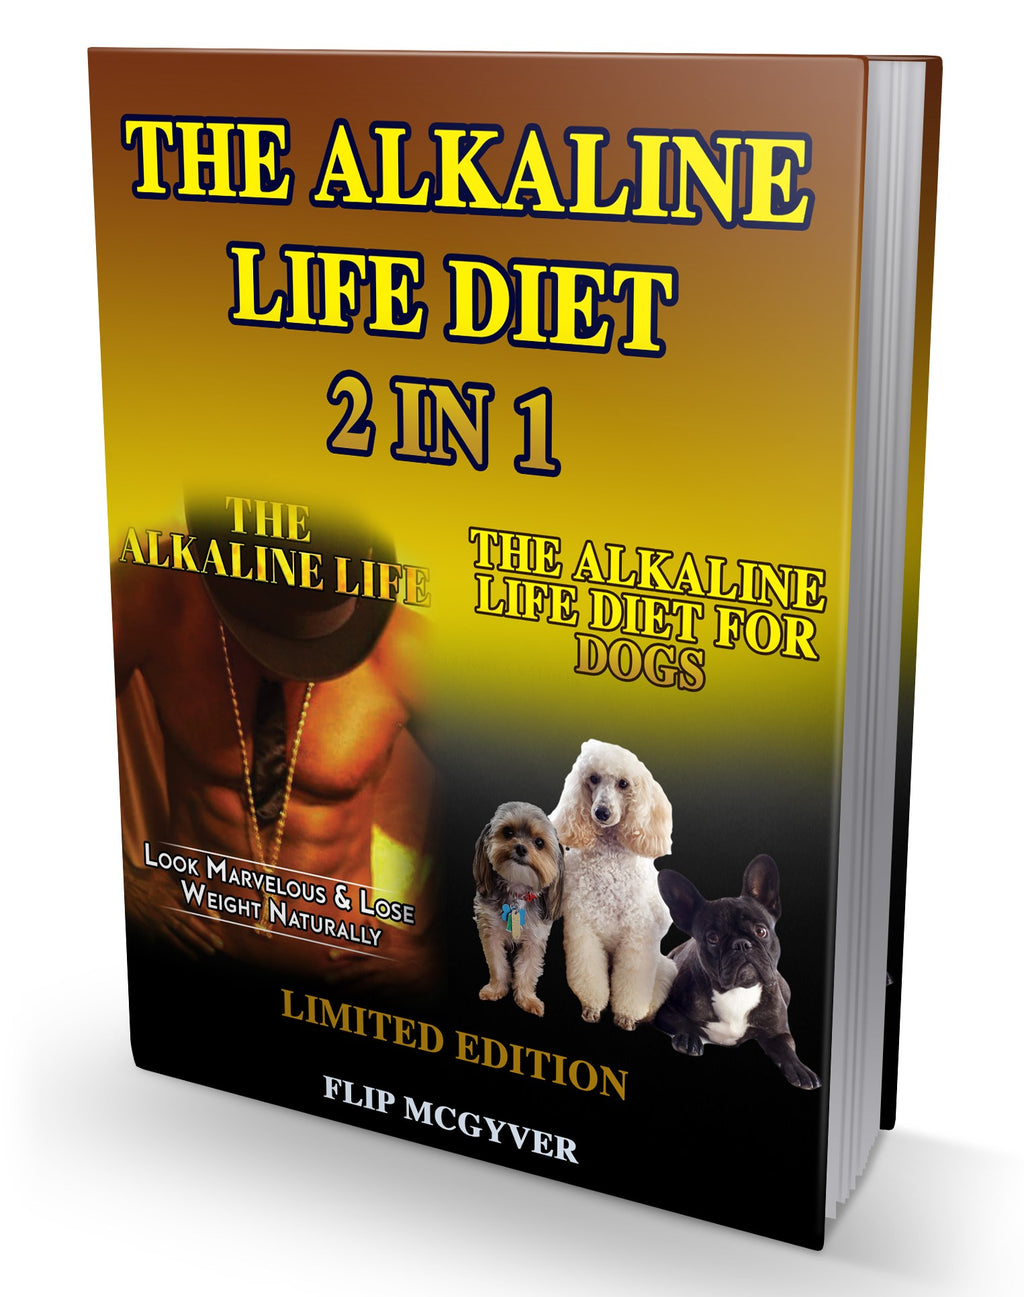 THE ALKALINE LIFE 2 BOOKS IN 1